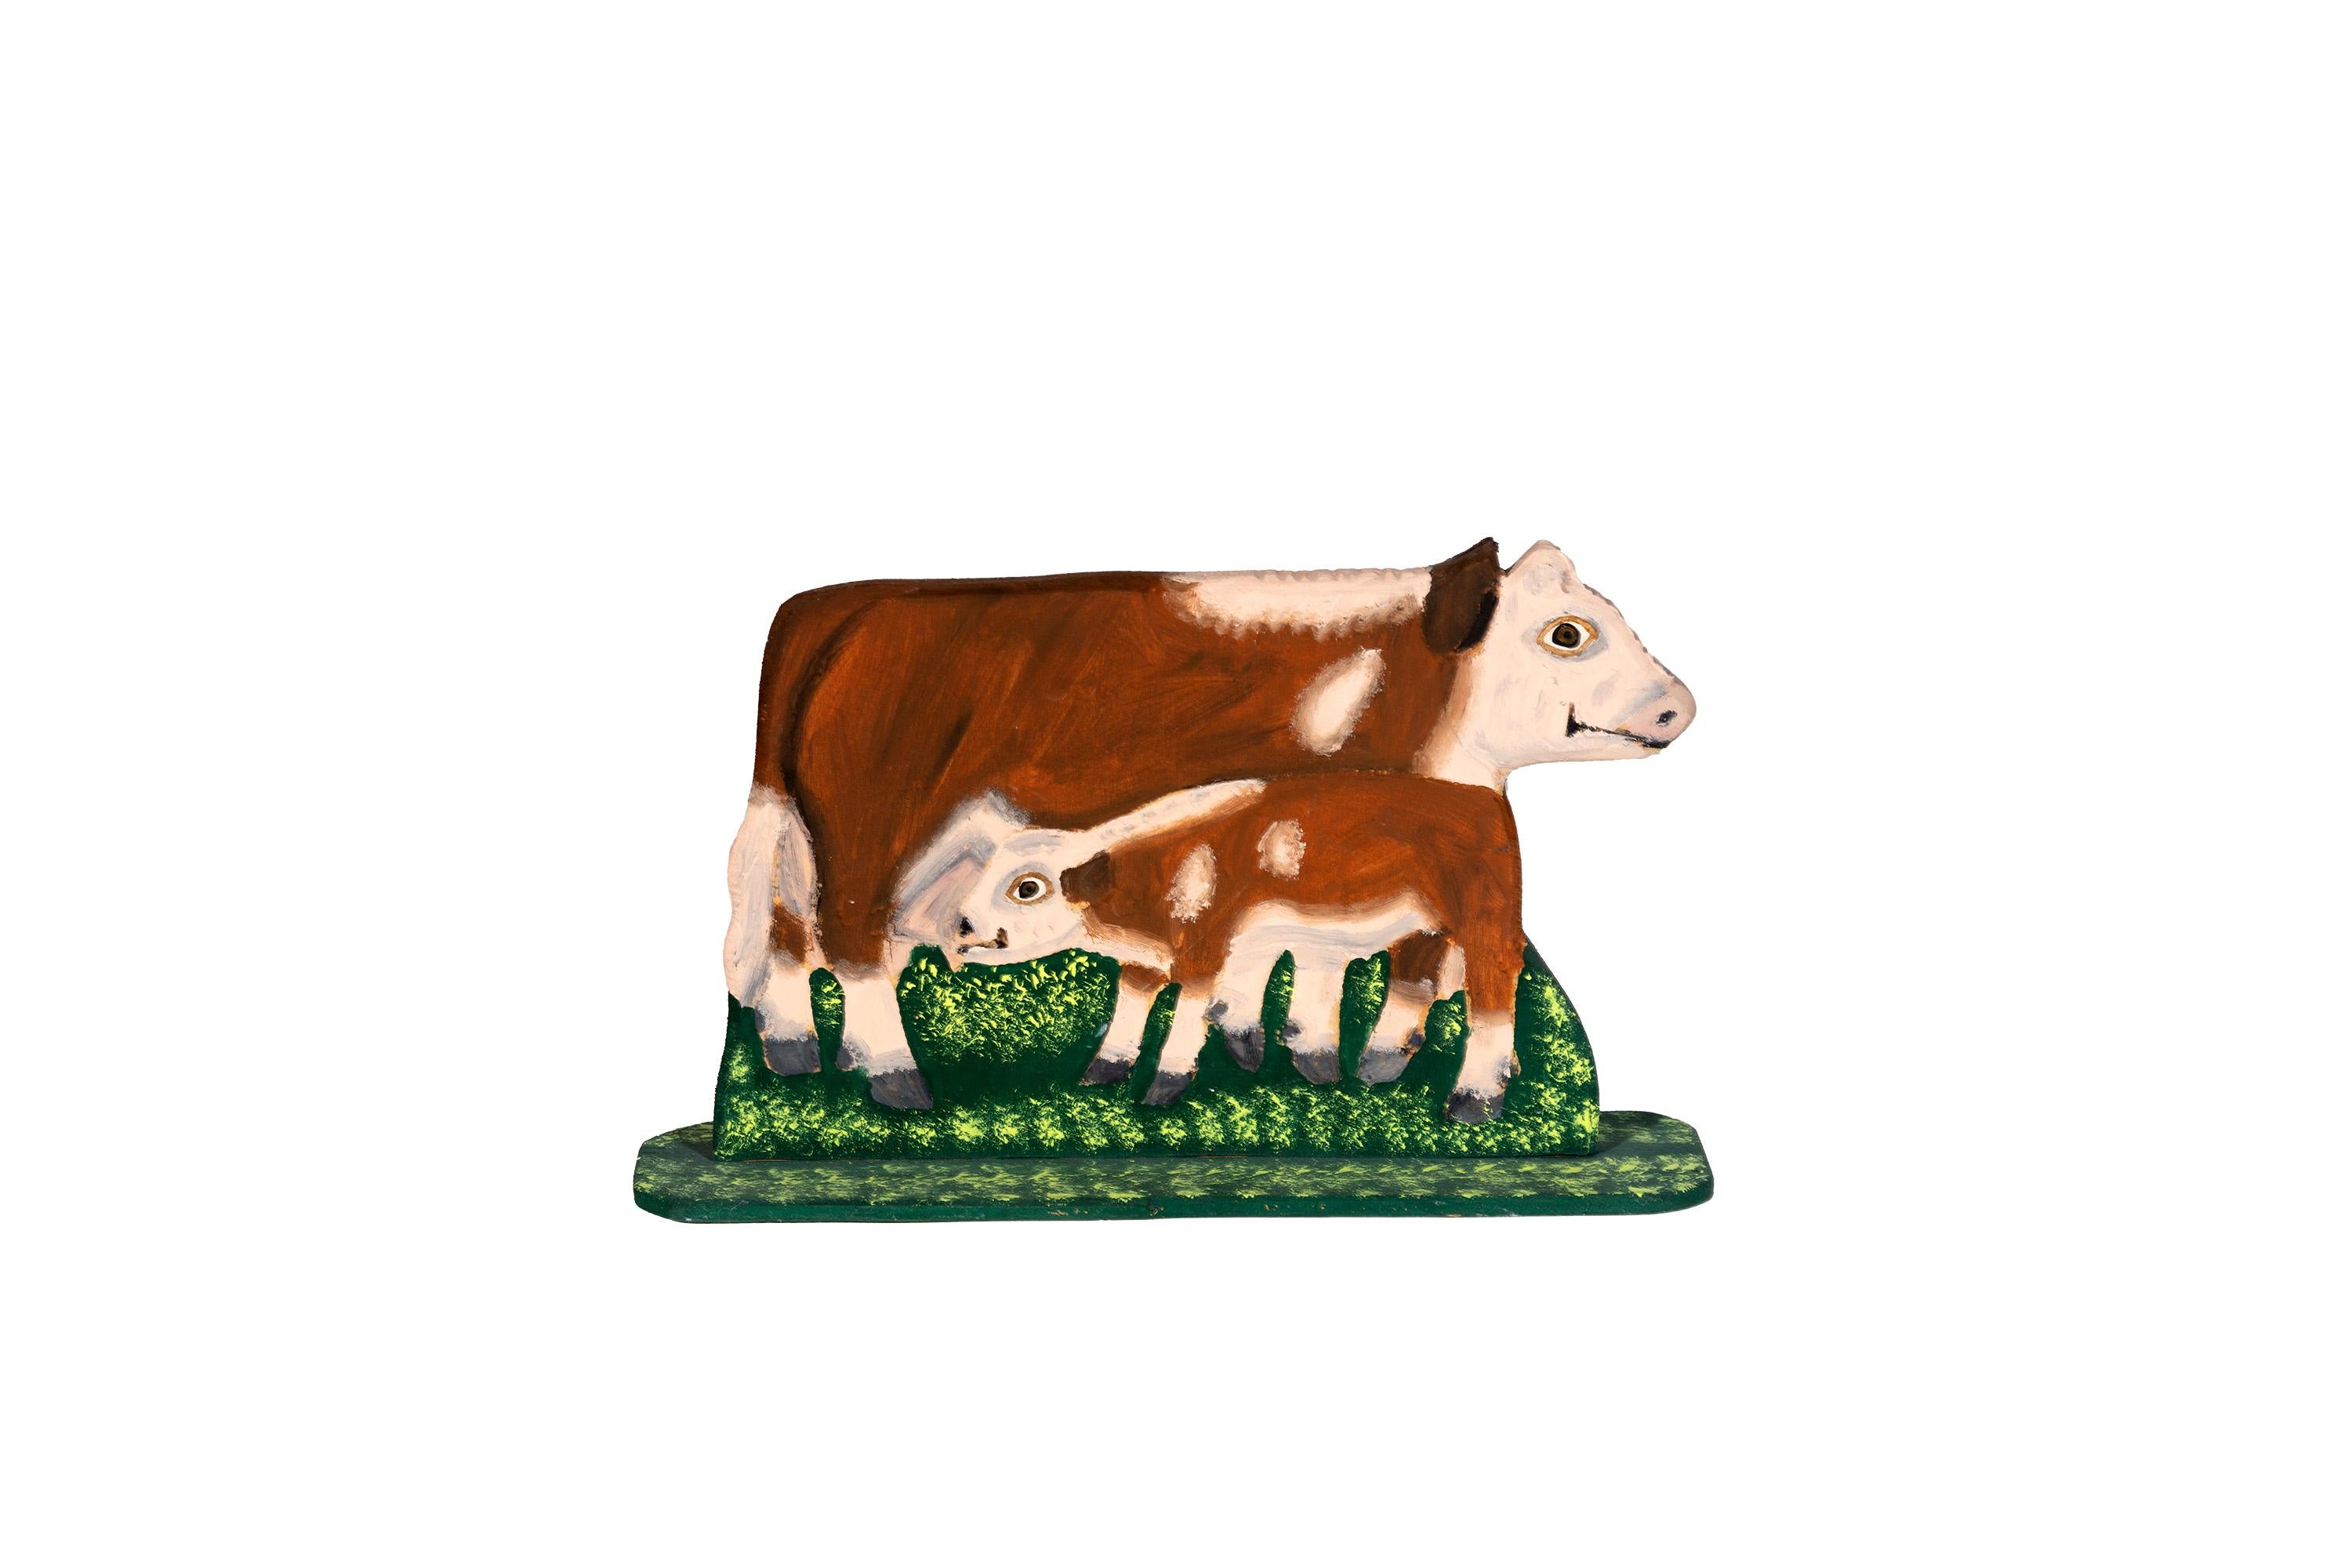 Menno Figurative Sculpture - 'Folk Art Cow' Signed by Artist, gift, small sculpture, classic deco